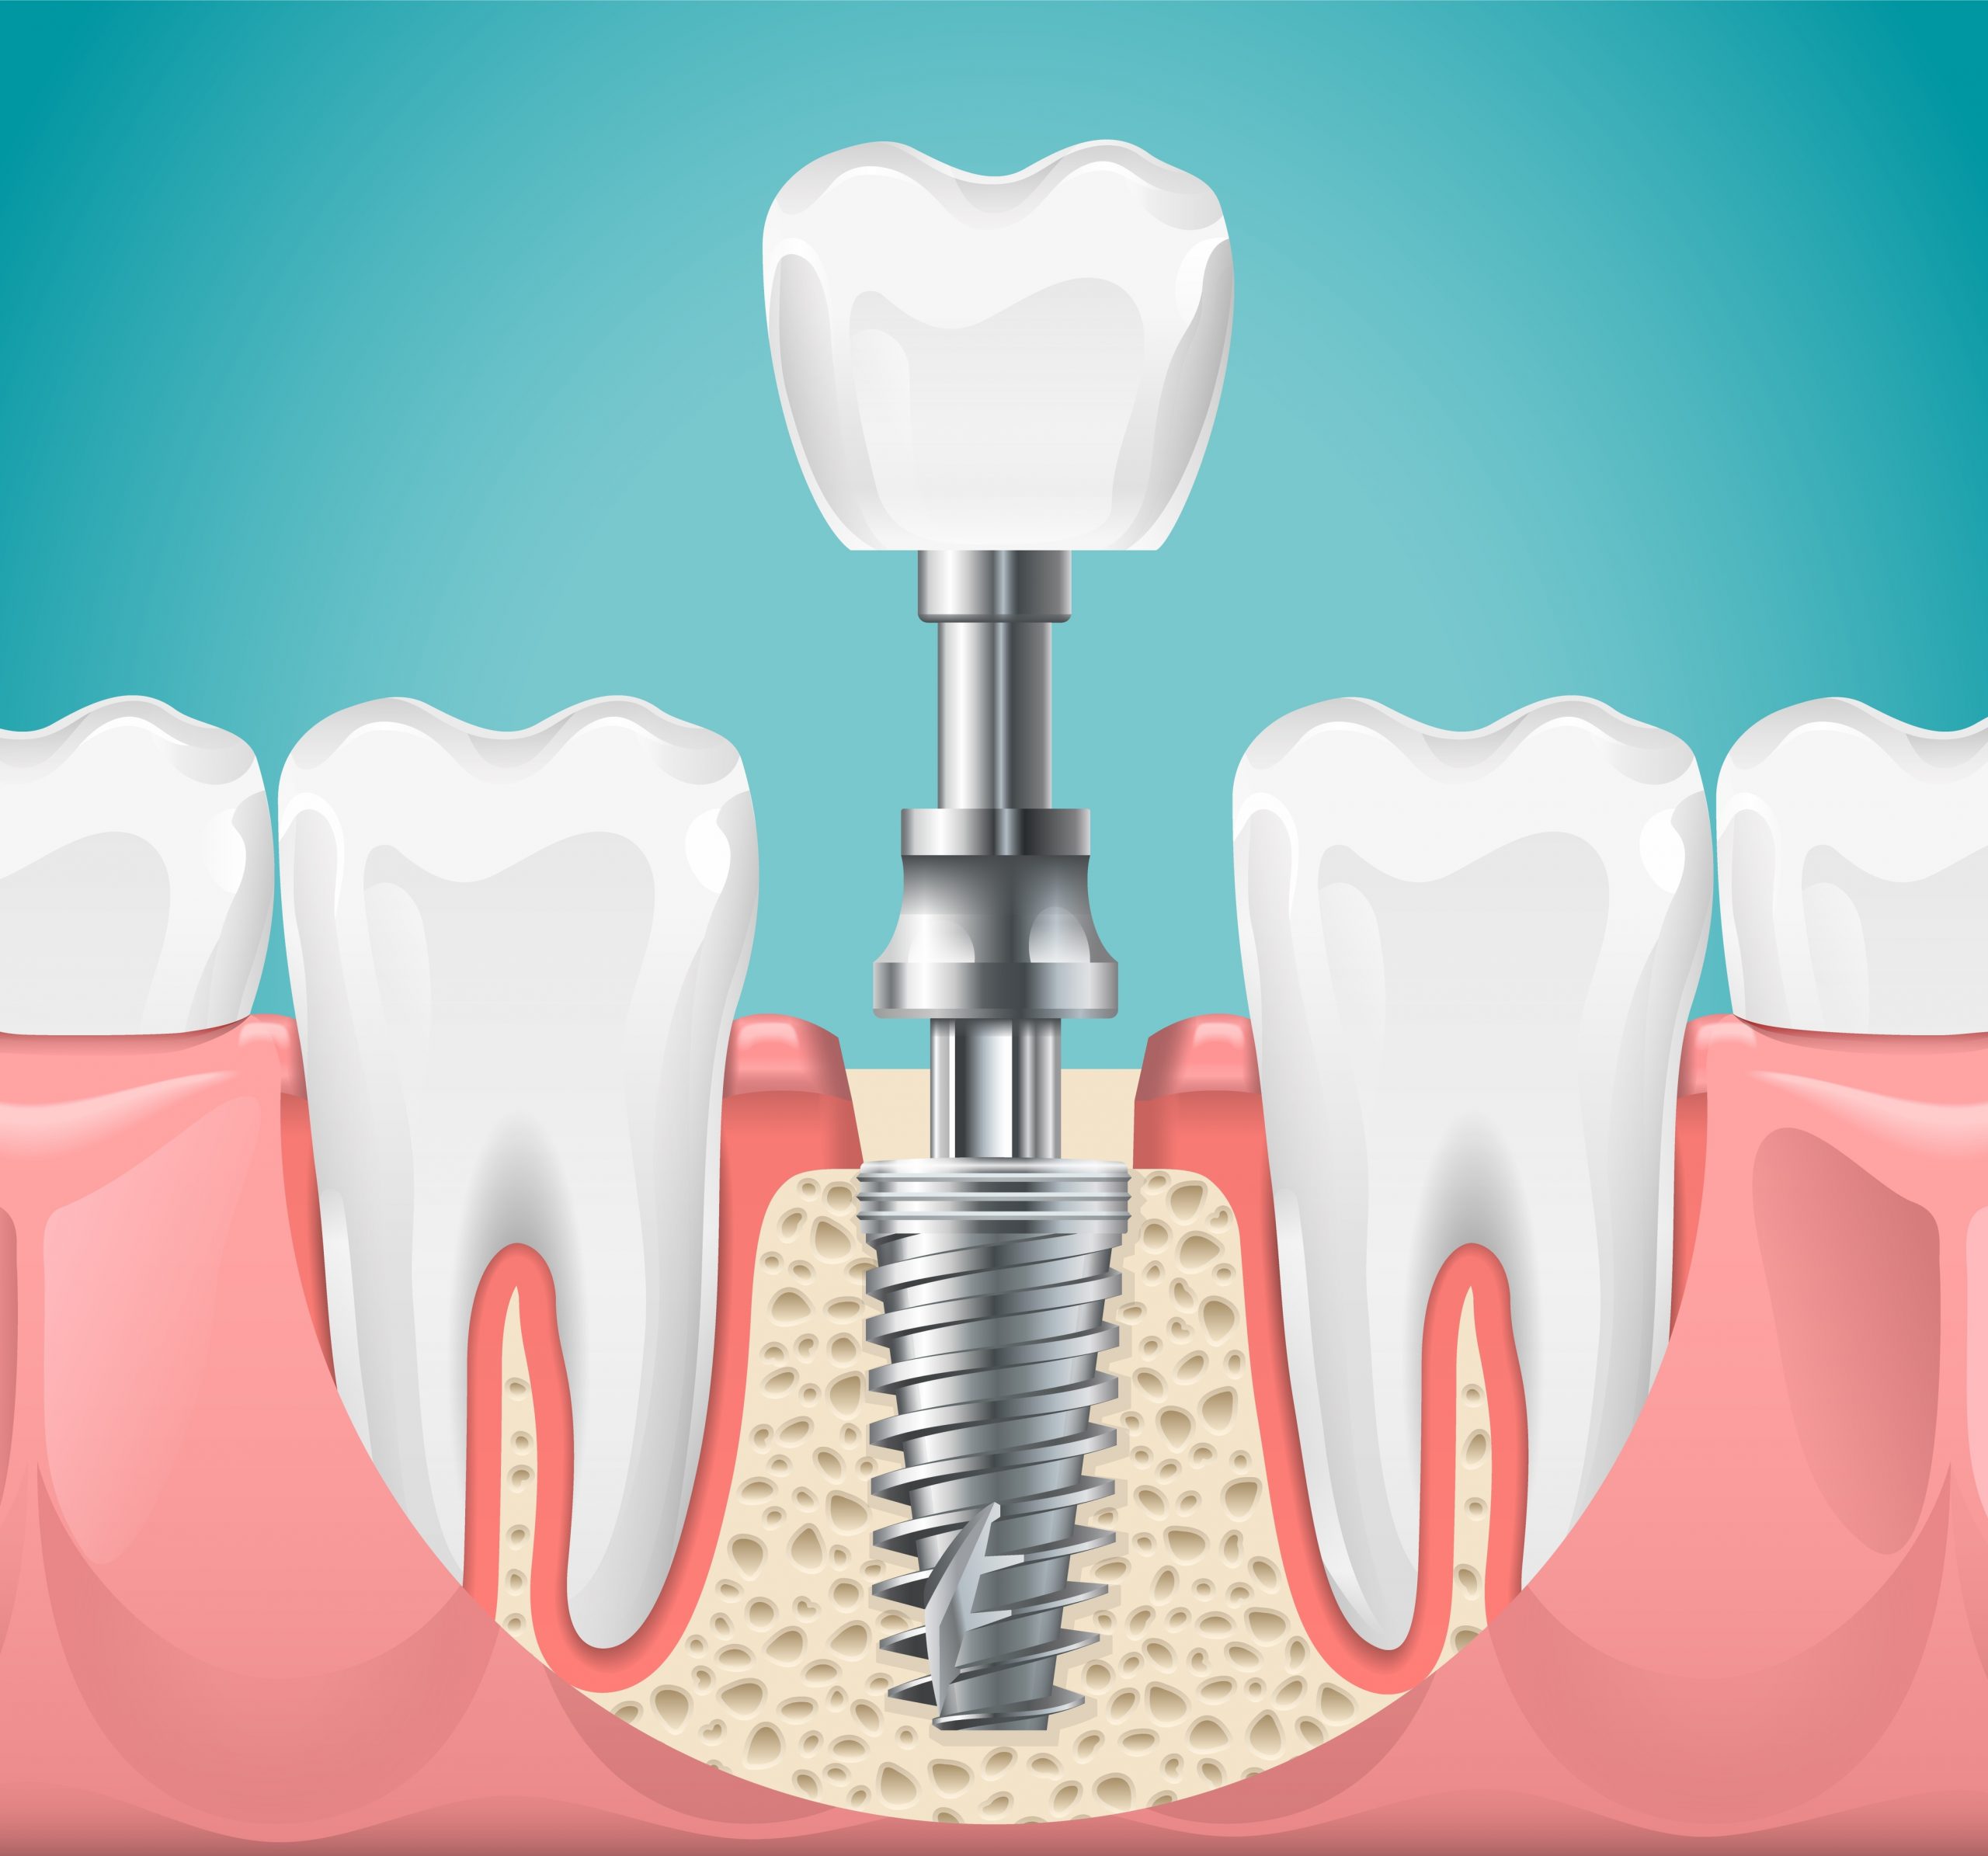 Dental Implants: 3 Types And How To Choose The Best